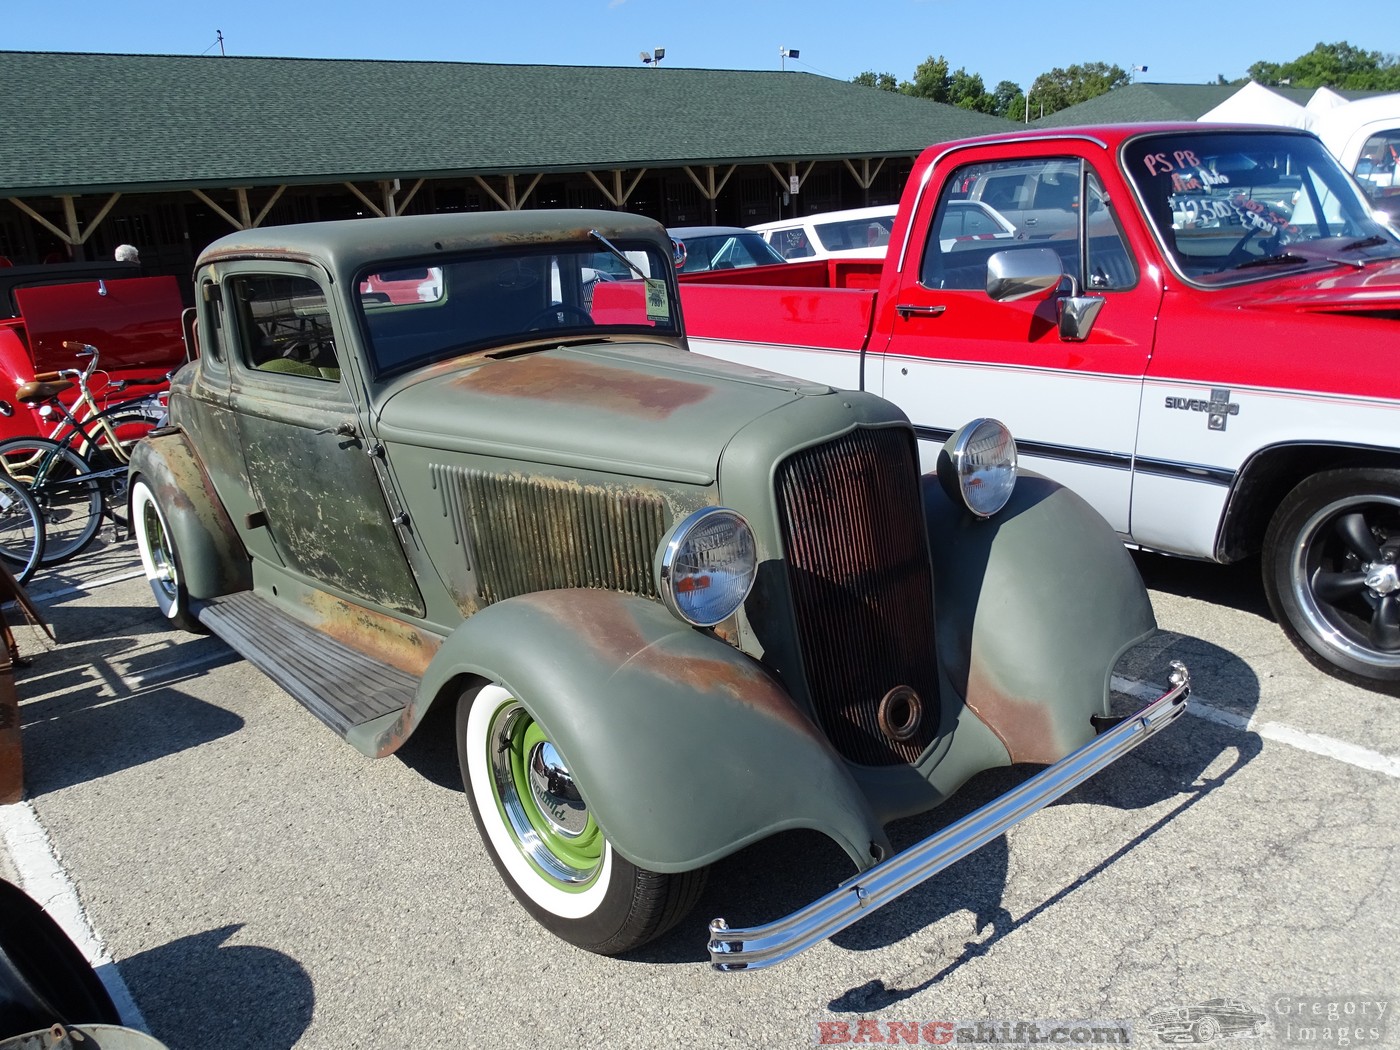 2017 NSRA Street Rod Nationals Coverage: More Swap Meet Cars and Parts For Sale